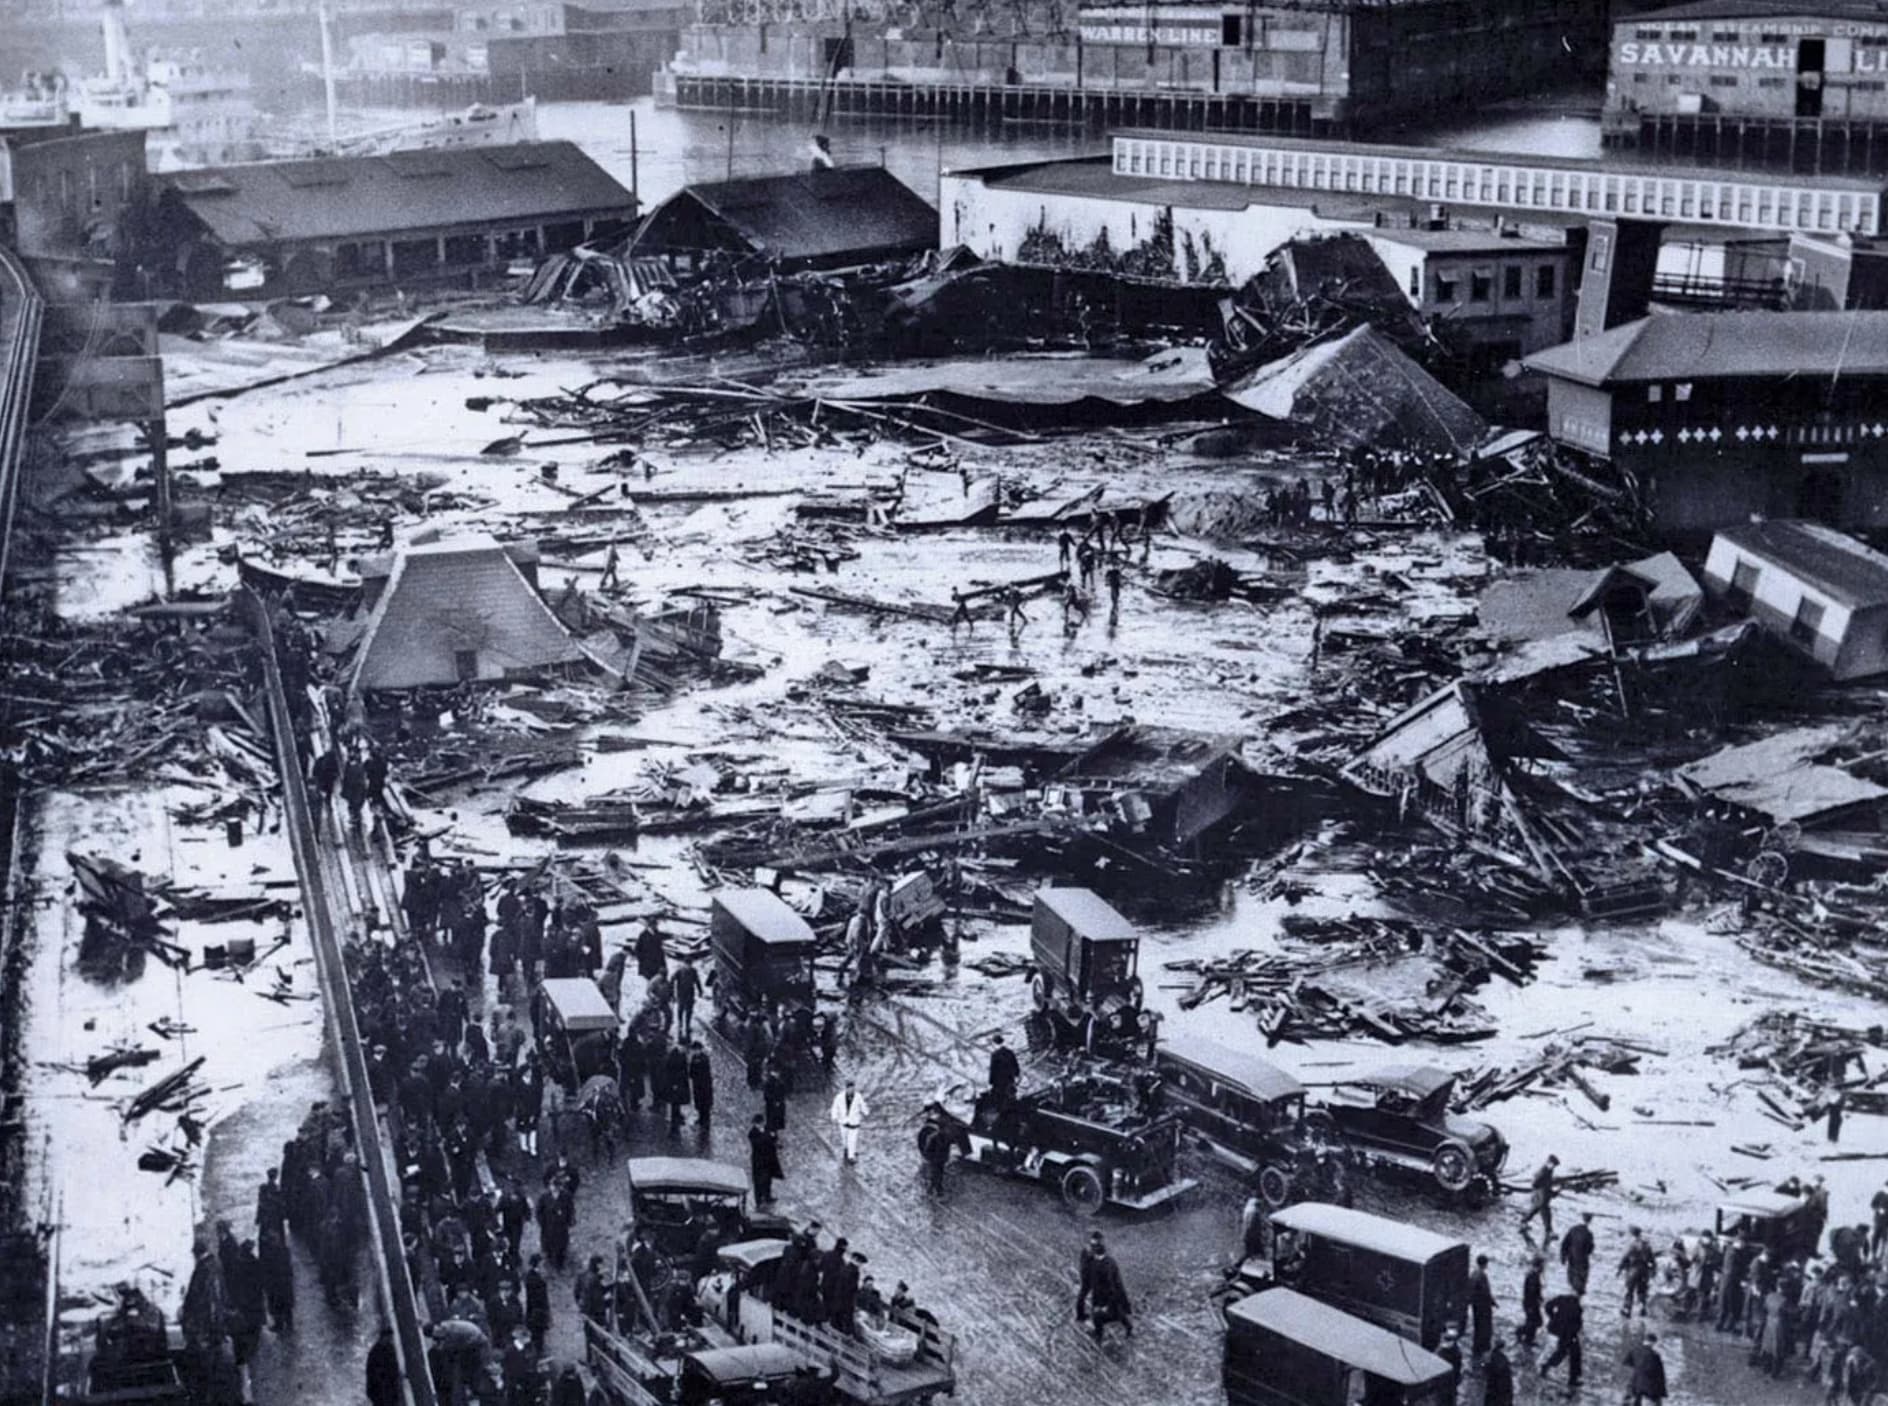 Despite its reputation as an old-timey sweet treat, Molasses is more than just its sugary reputation, serving as the catalyst for a deadly flood that left 21 dead and 150 injured. On January 15, 1919, a 2.3 million gallon tank full of molasses exploded with  "a thunderclap-like bang!" per one witness, sending a roughly 15-foot tall wave of the sweet stuff crashing down onto the New England city. 